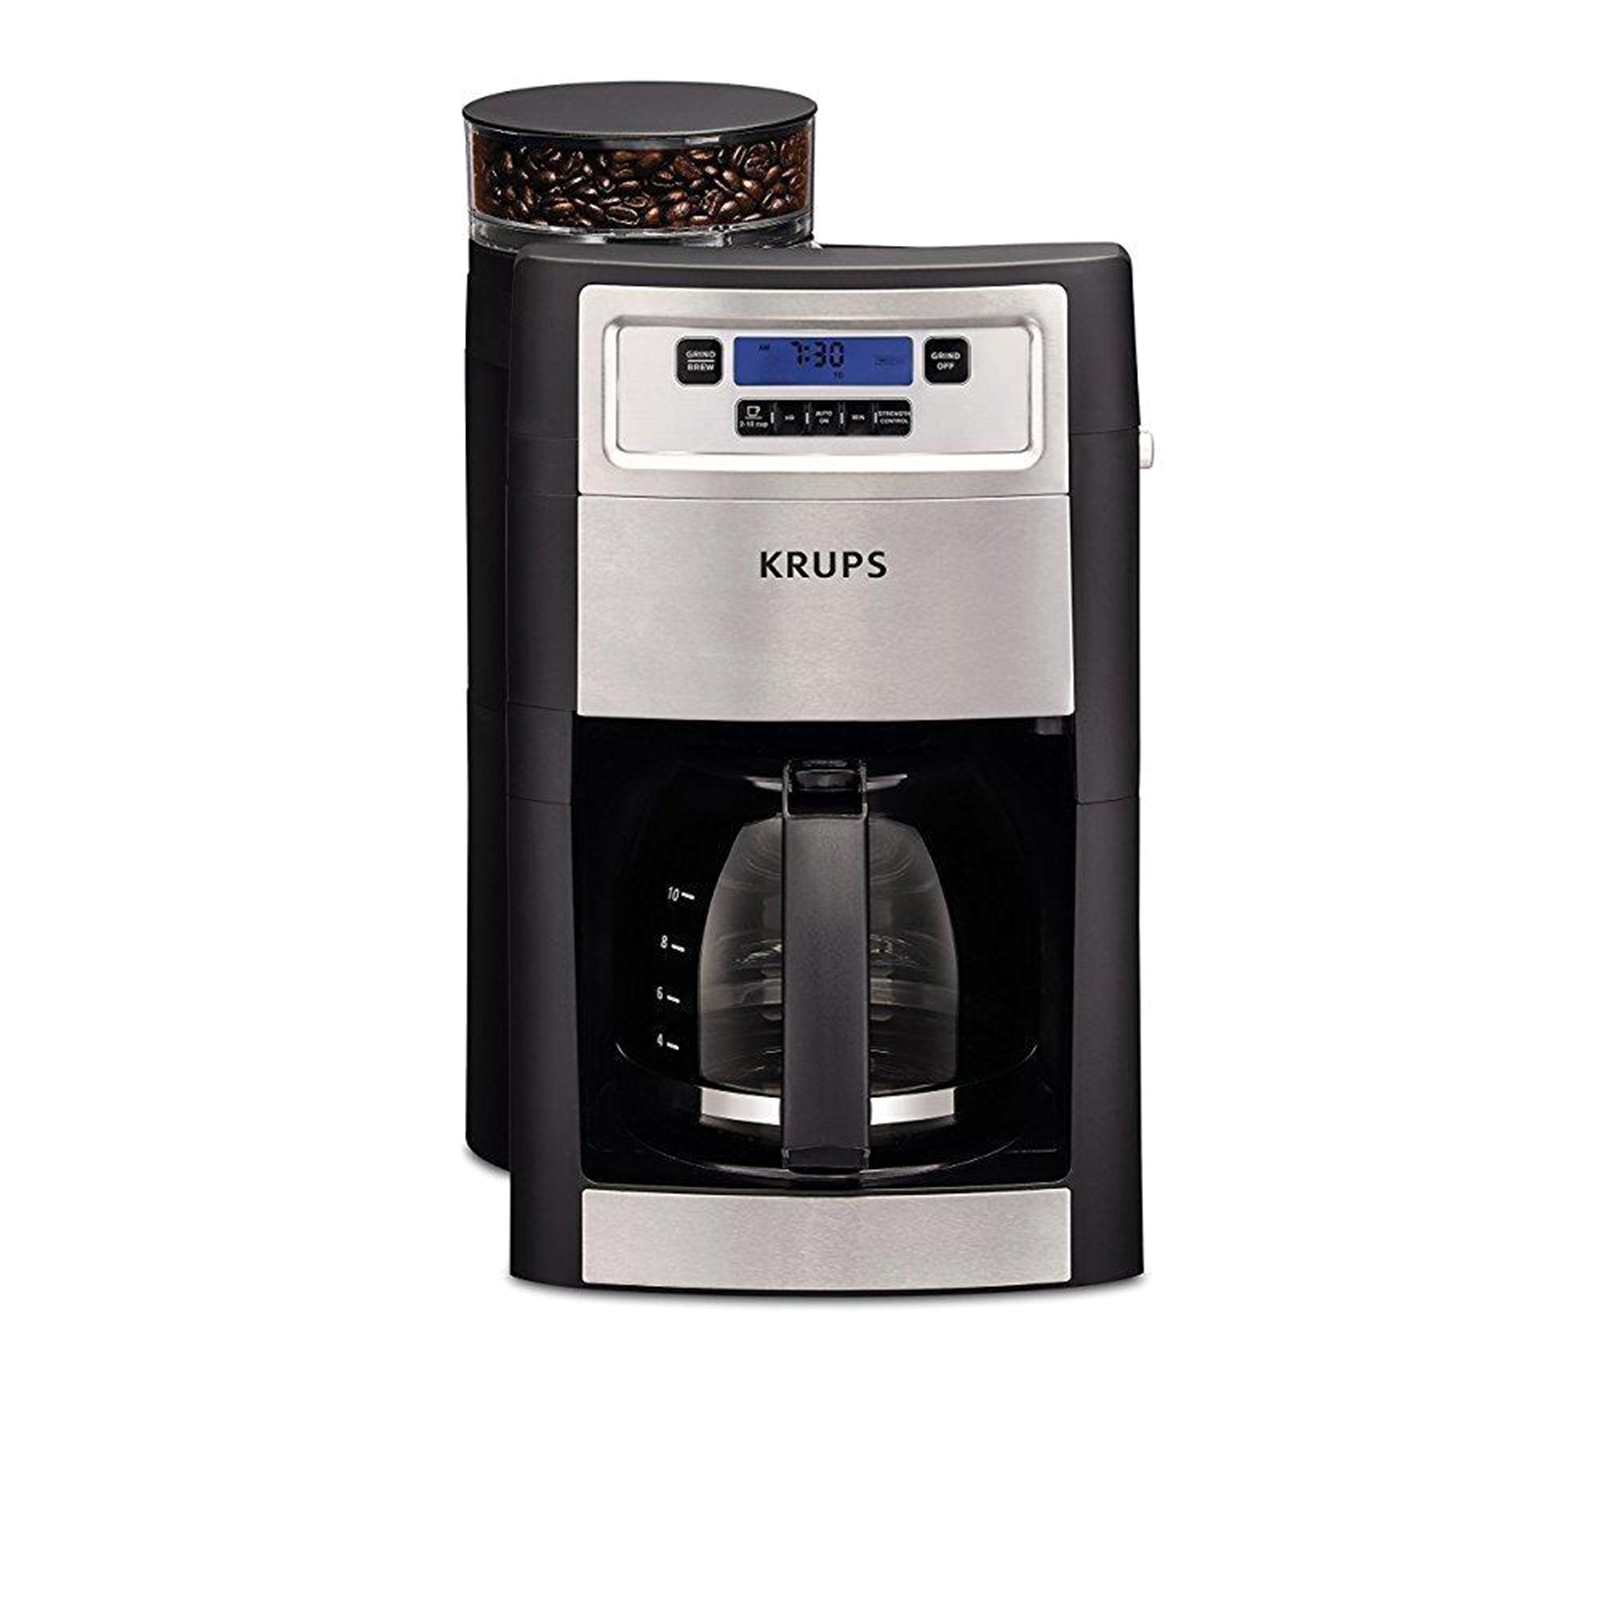 KRUPS KM785D50  Grind and Brew Automatic Coffee Maker - Black